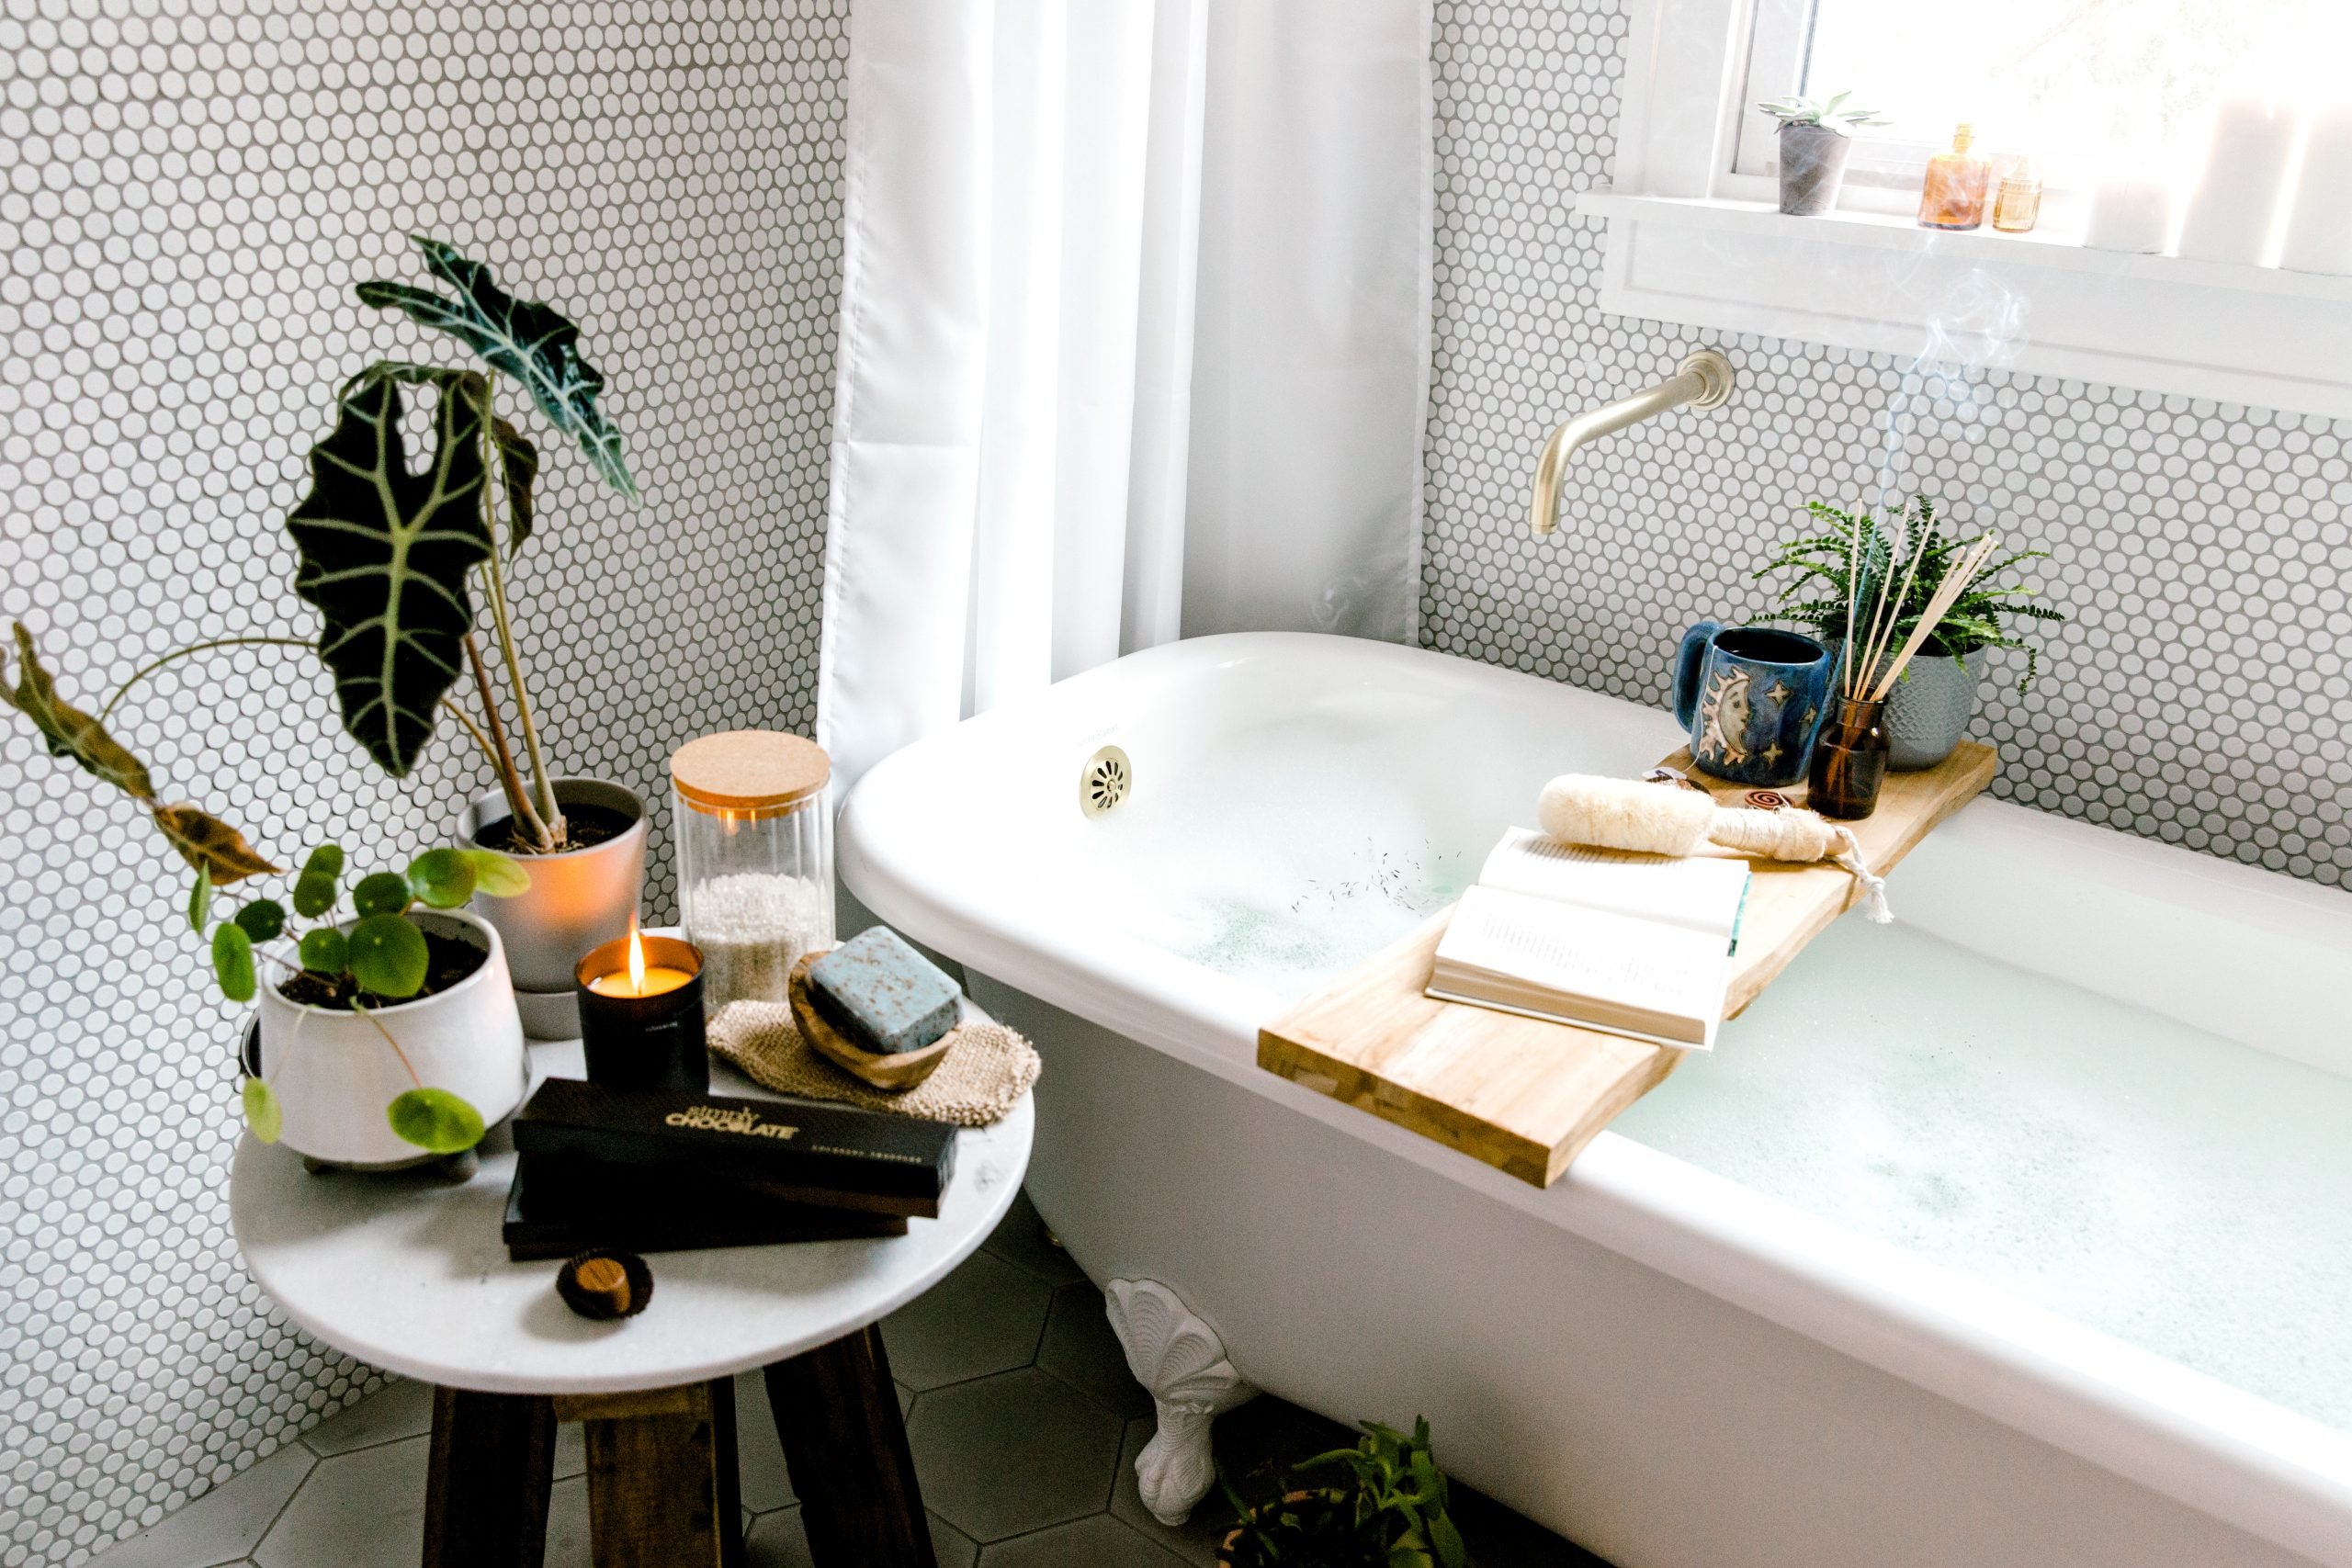 https://camillestyles.com/wp-content/uploads/2021/03/how-to-take-a-relaxing-bath-scaled.jpg